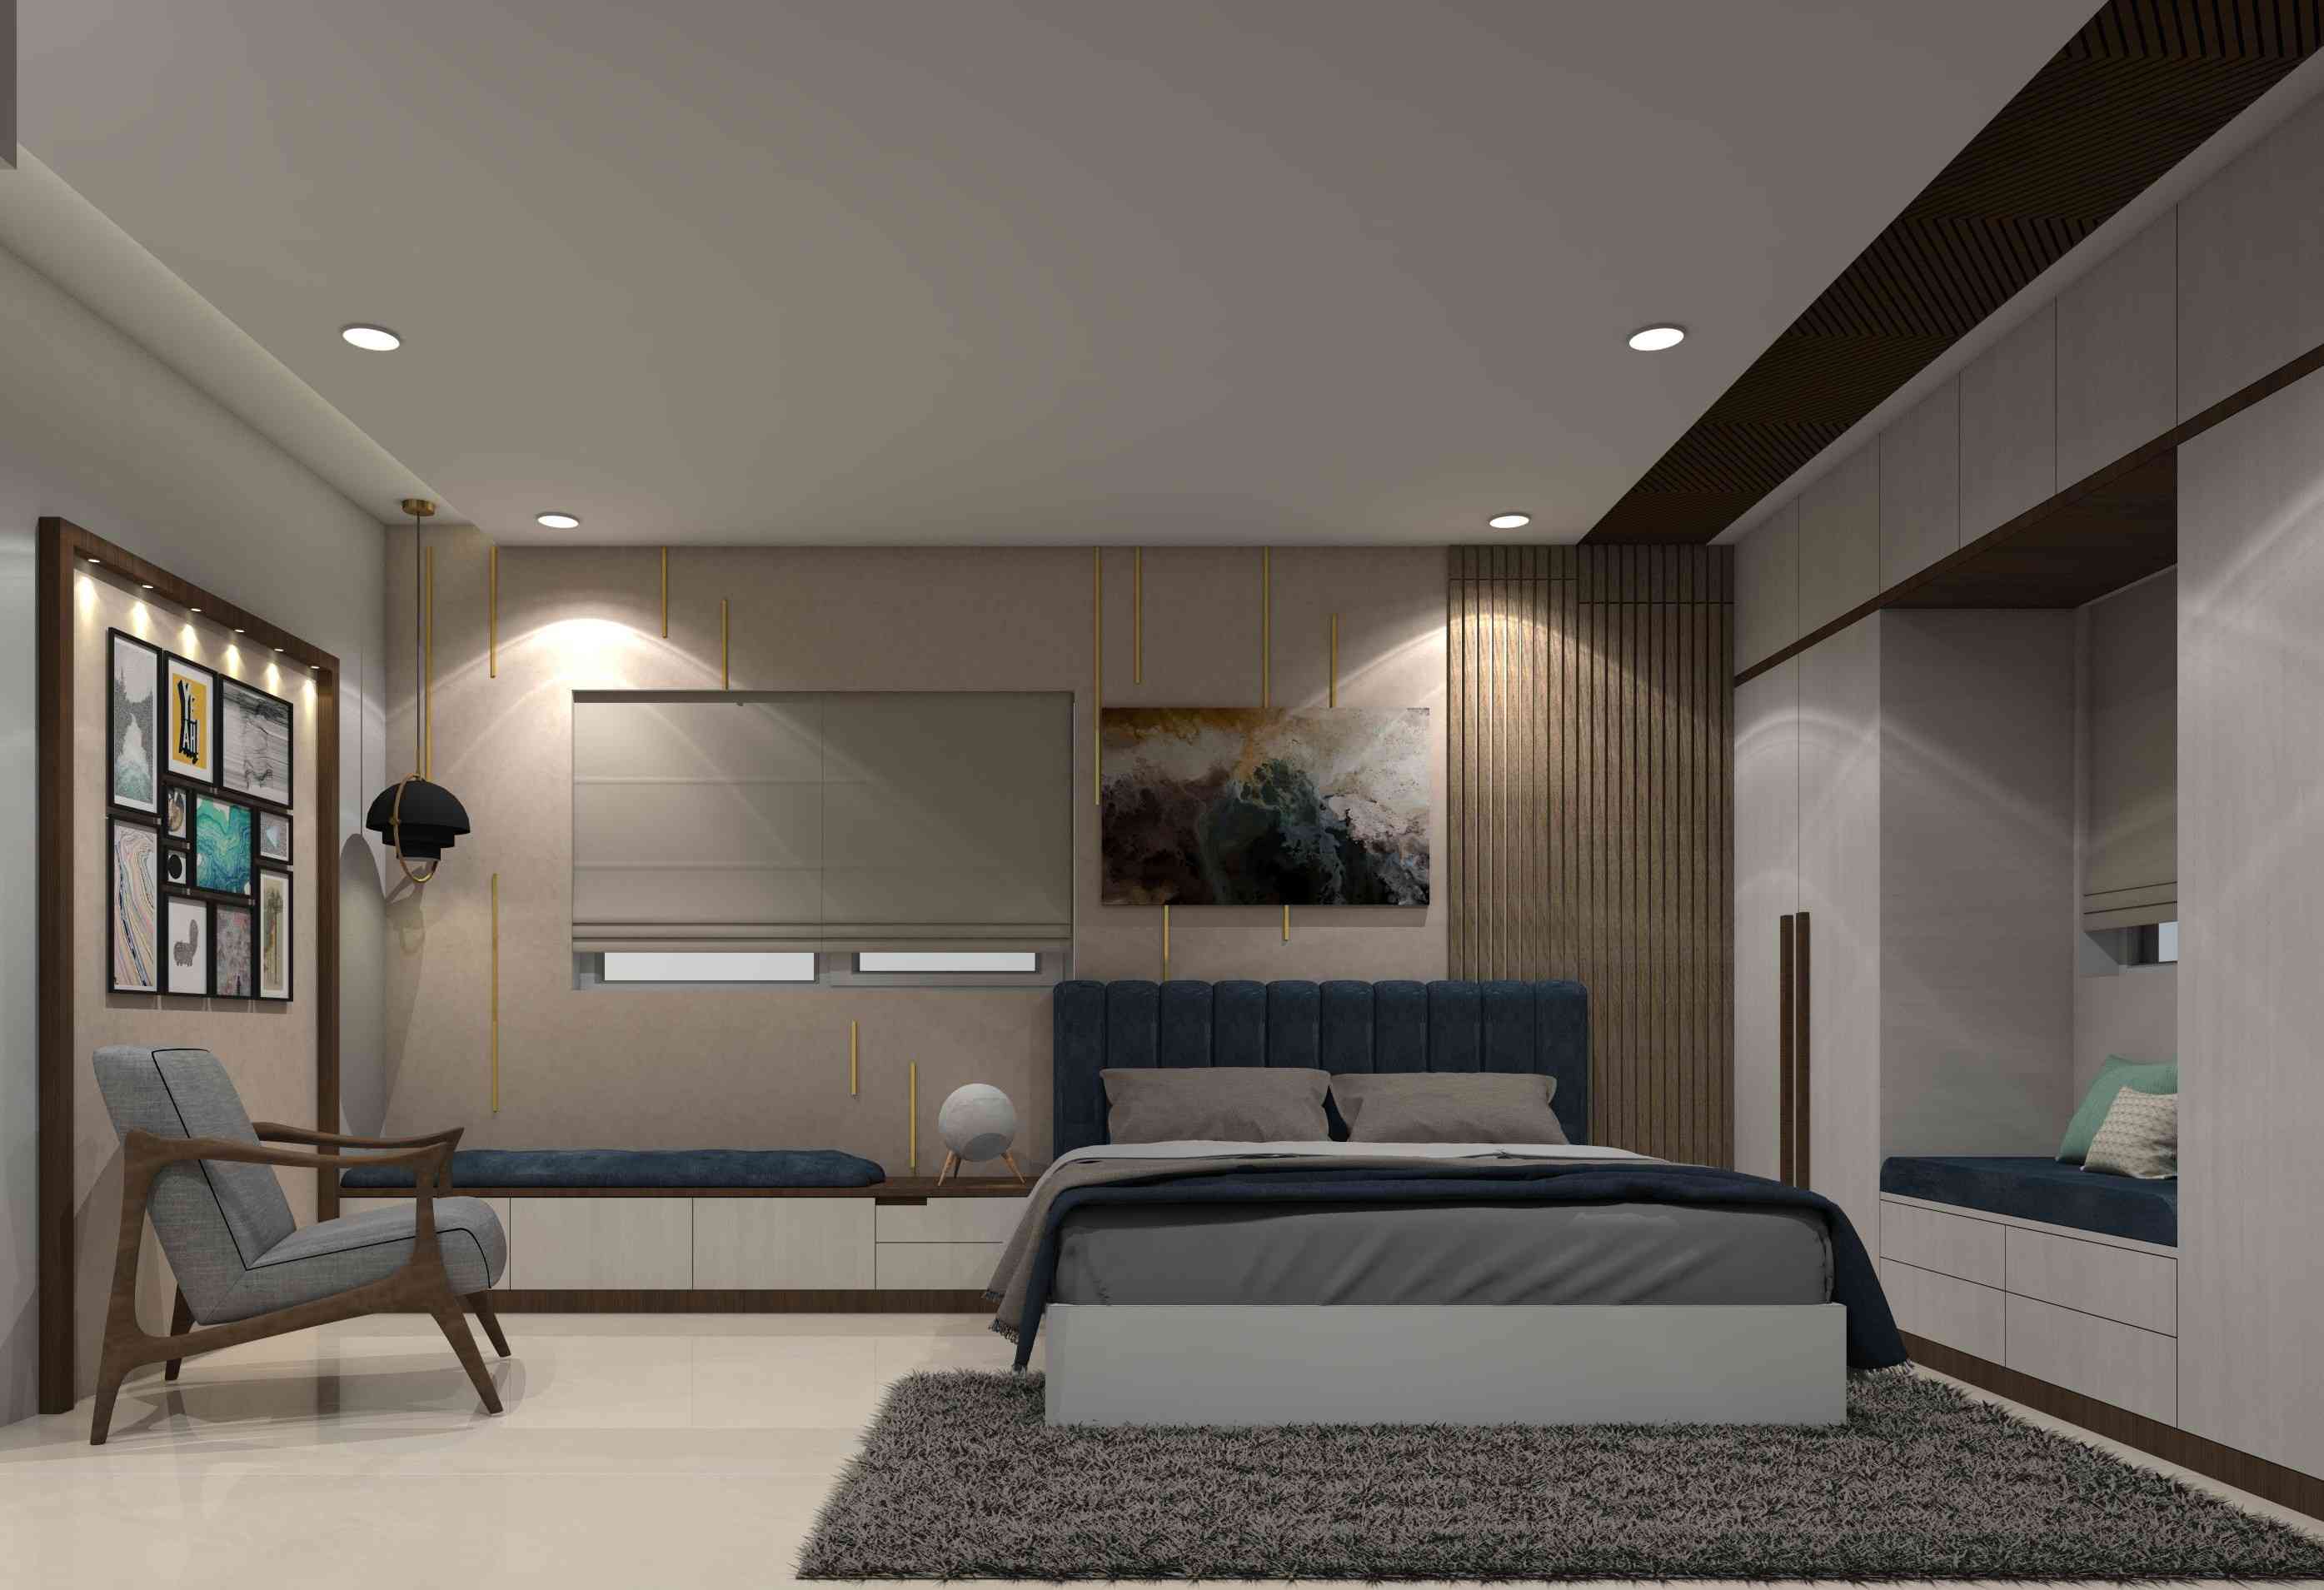 Modern Master Bedroom Design In Grey And White Tones